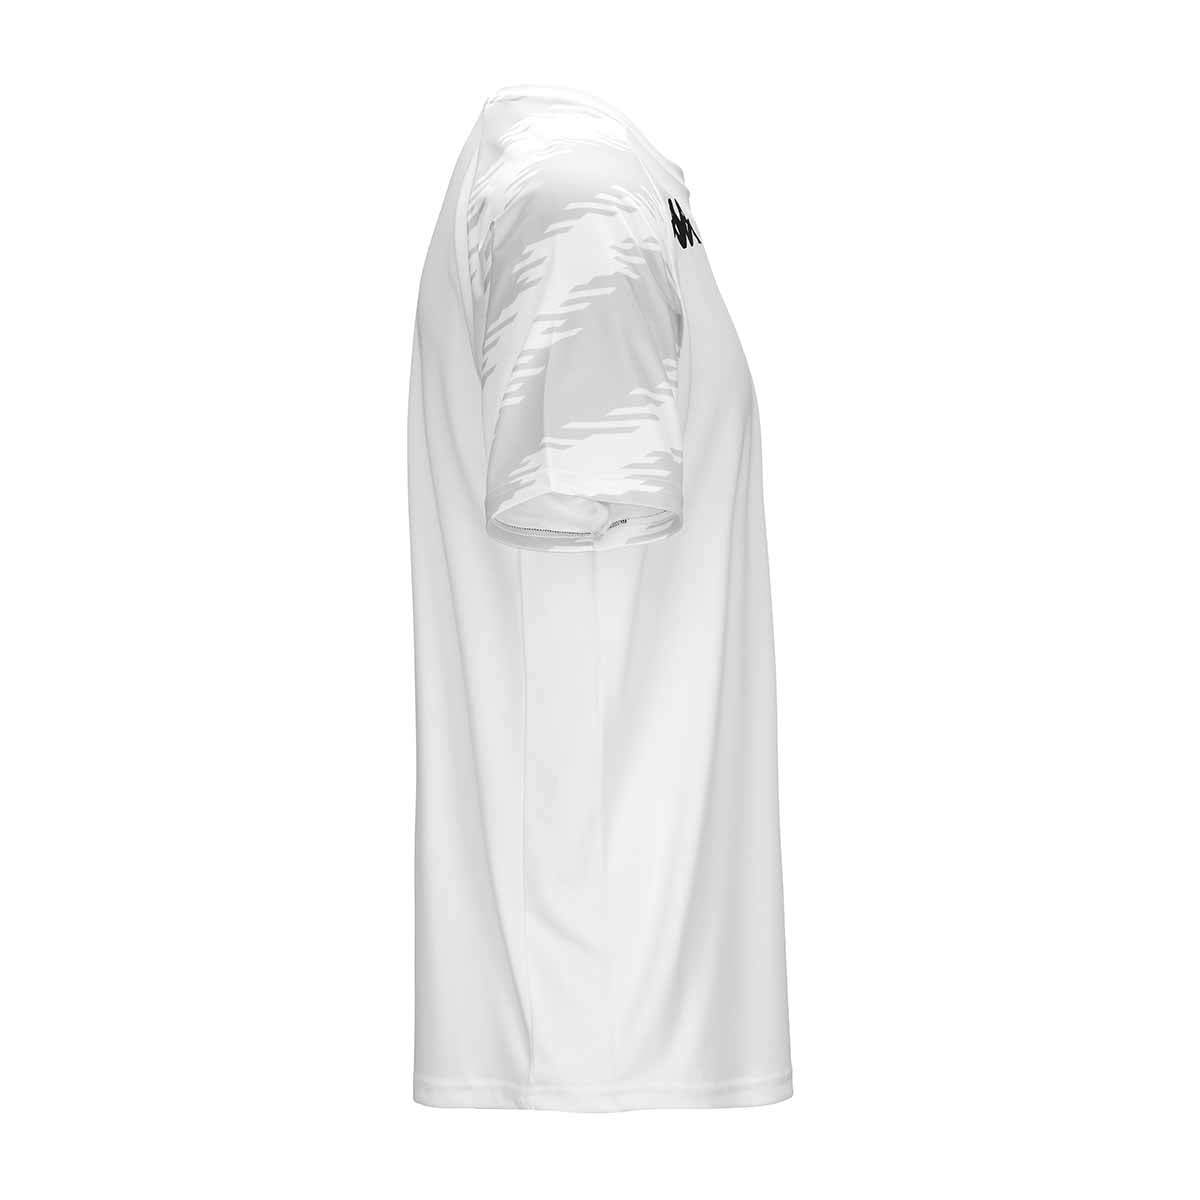 Maillot Daverno Blanc Homme